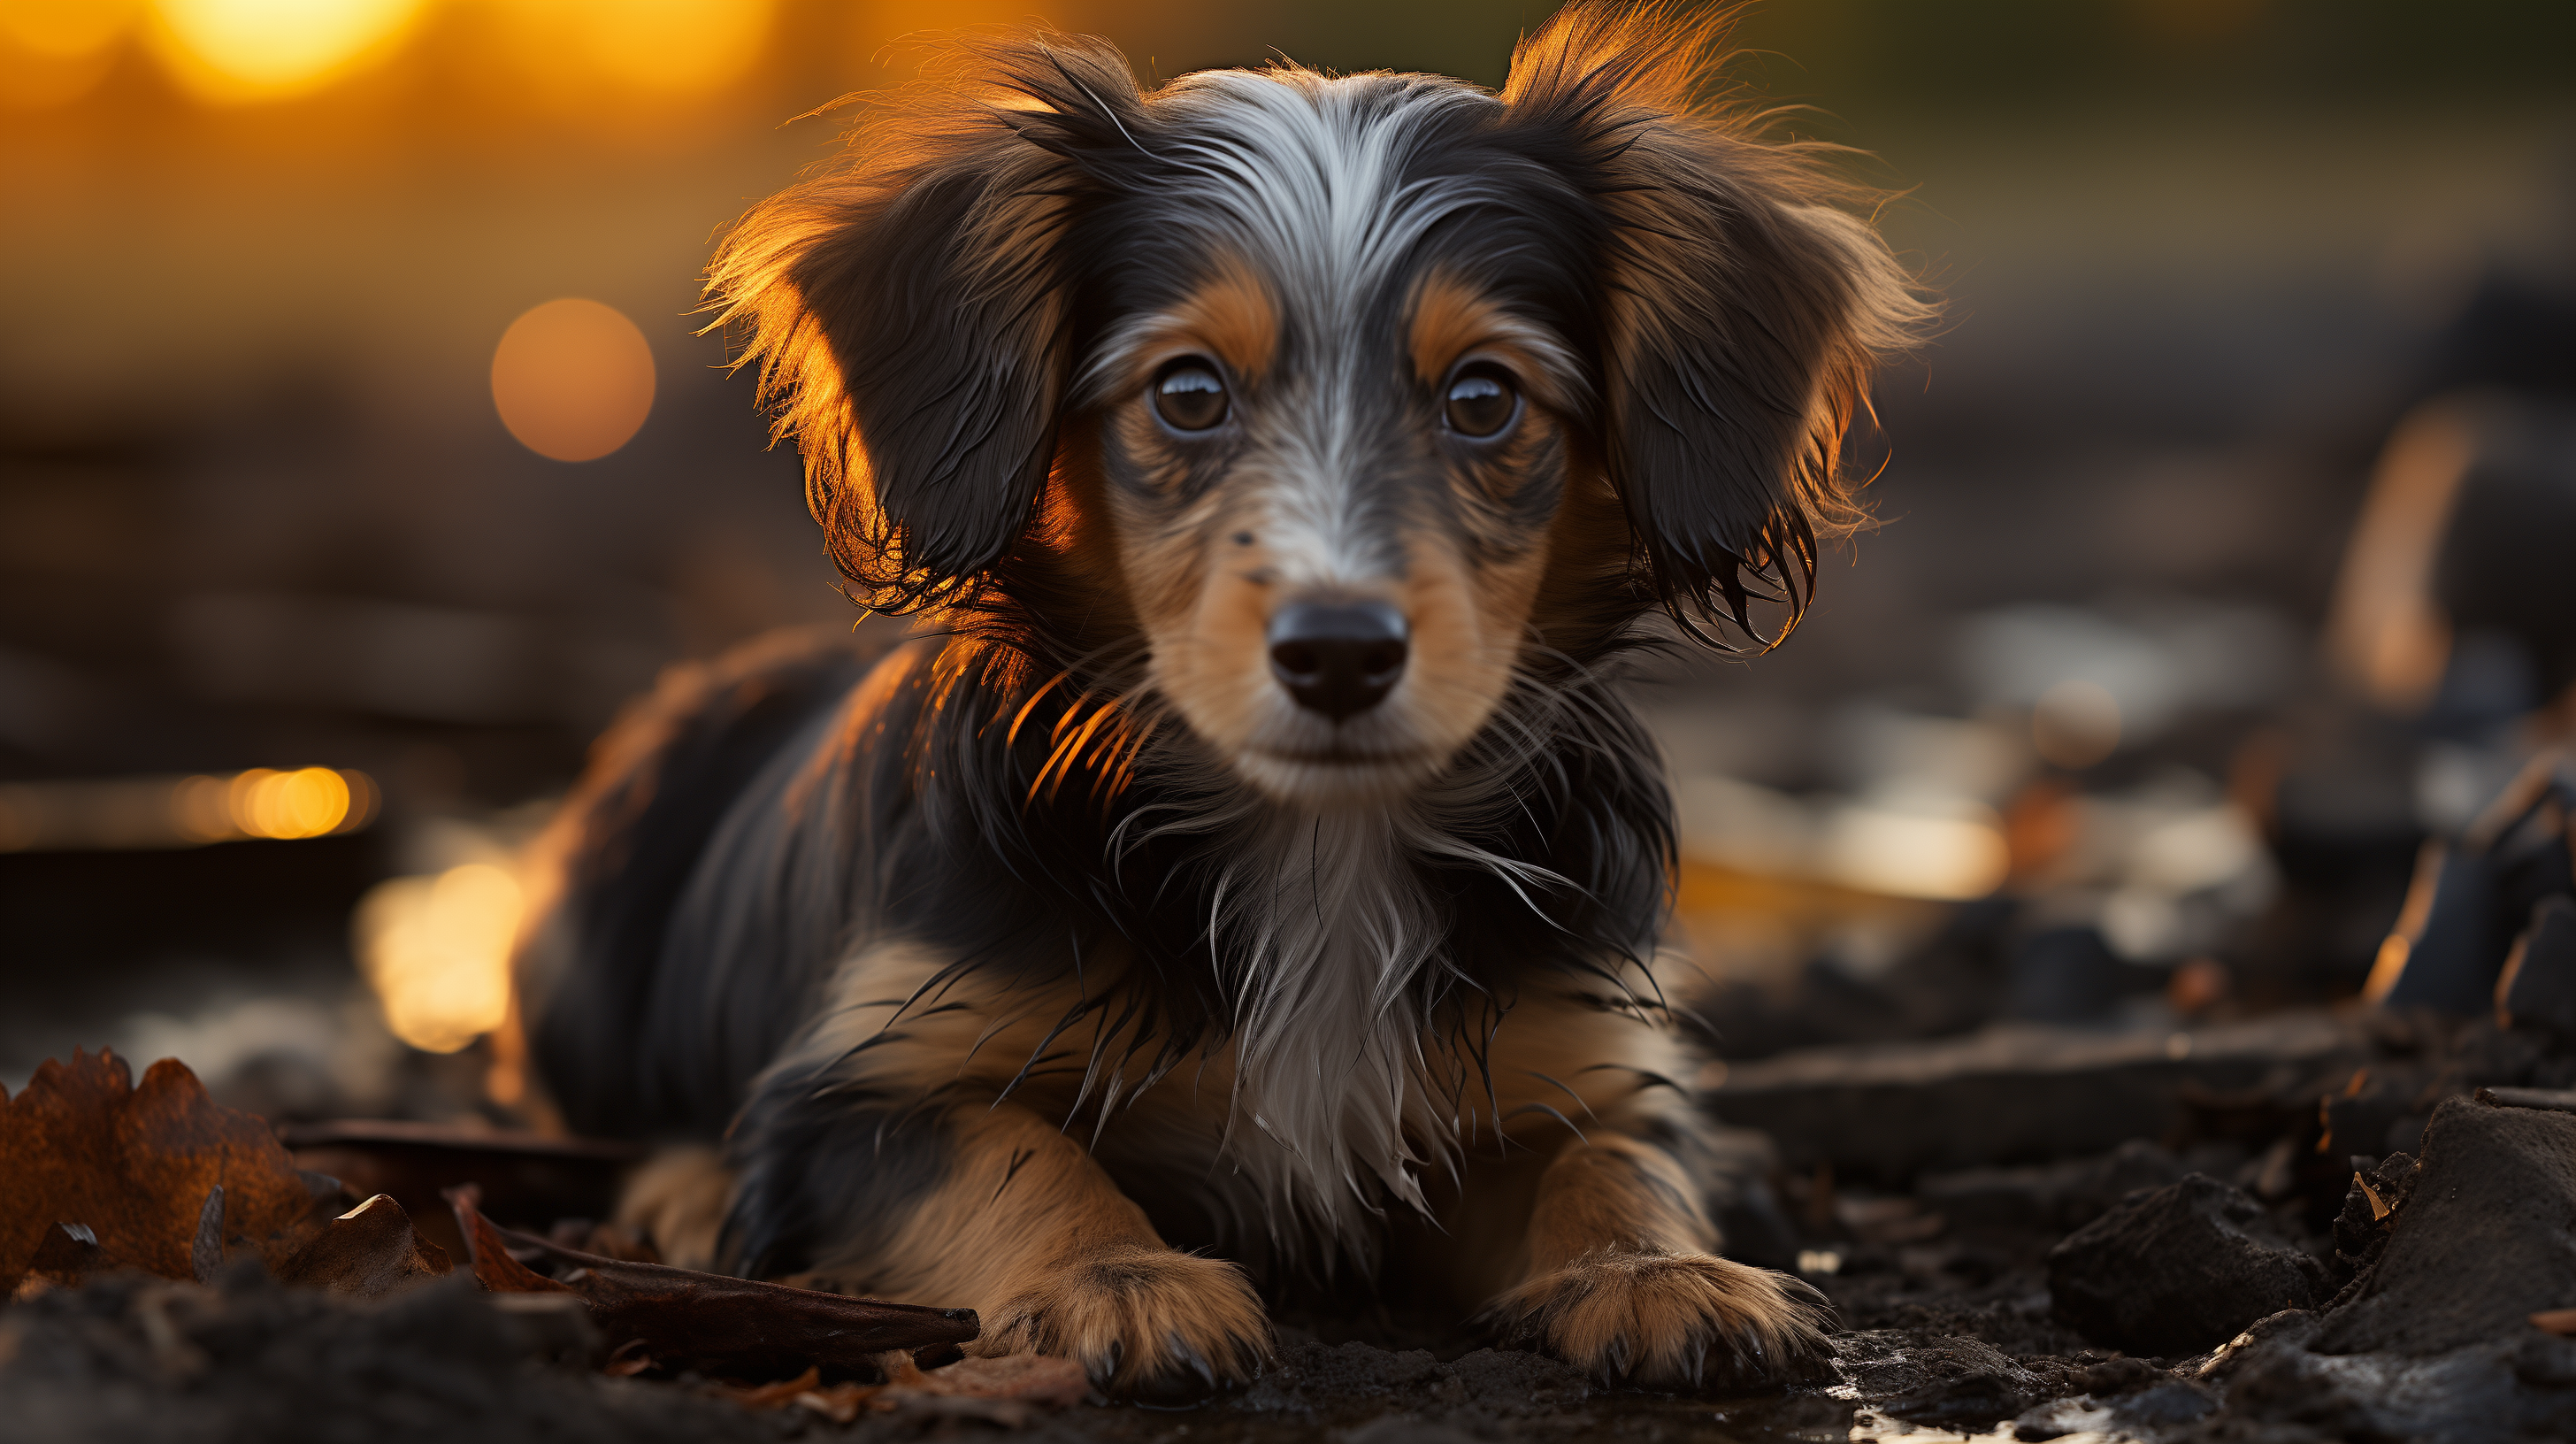 Adorable Dachshund puppy lying down with a warm sunset background - HD dog wallpaper.